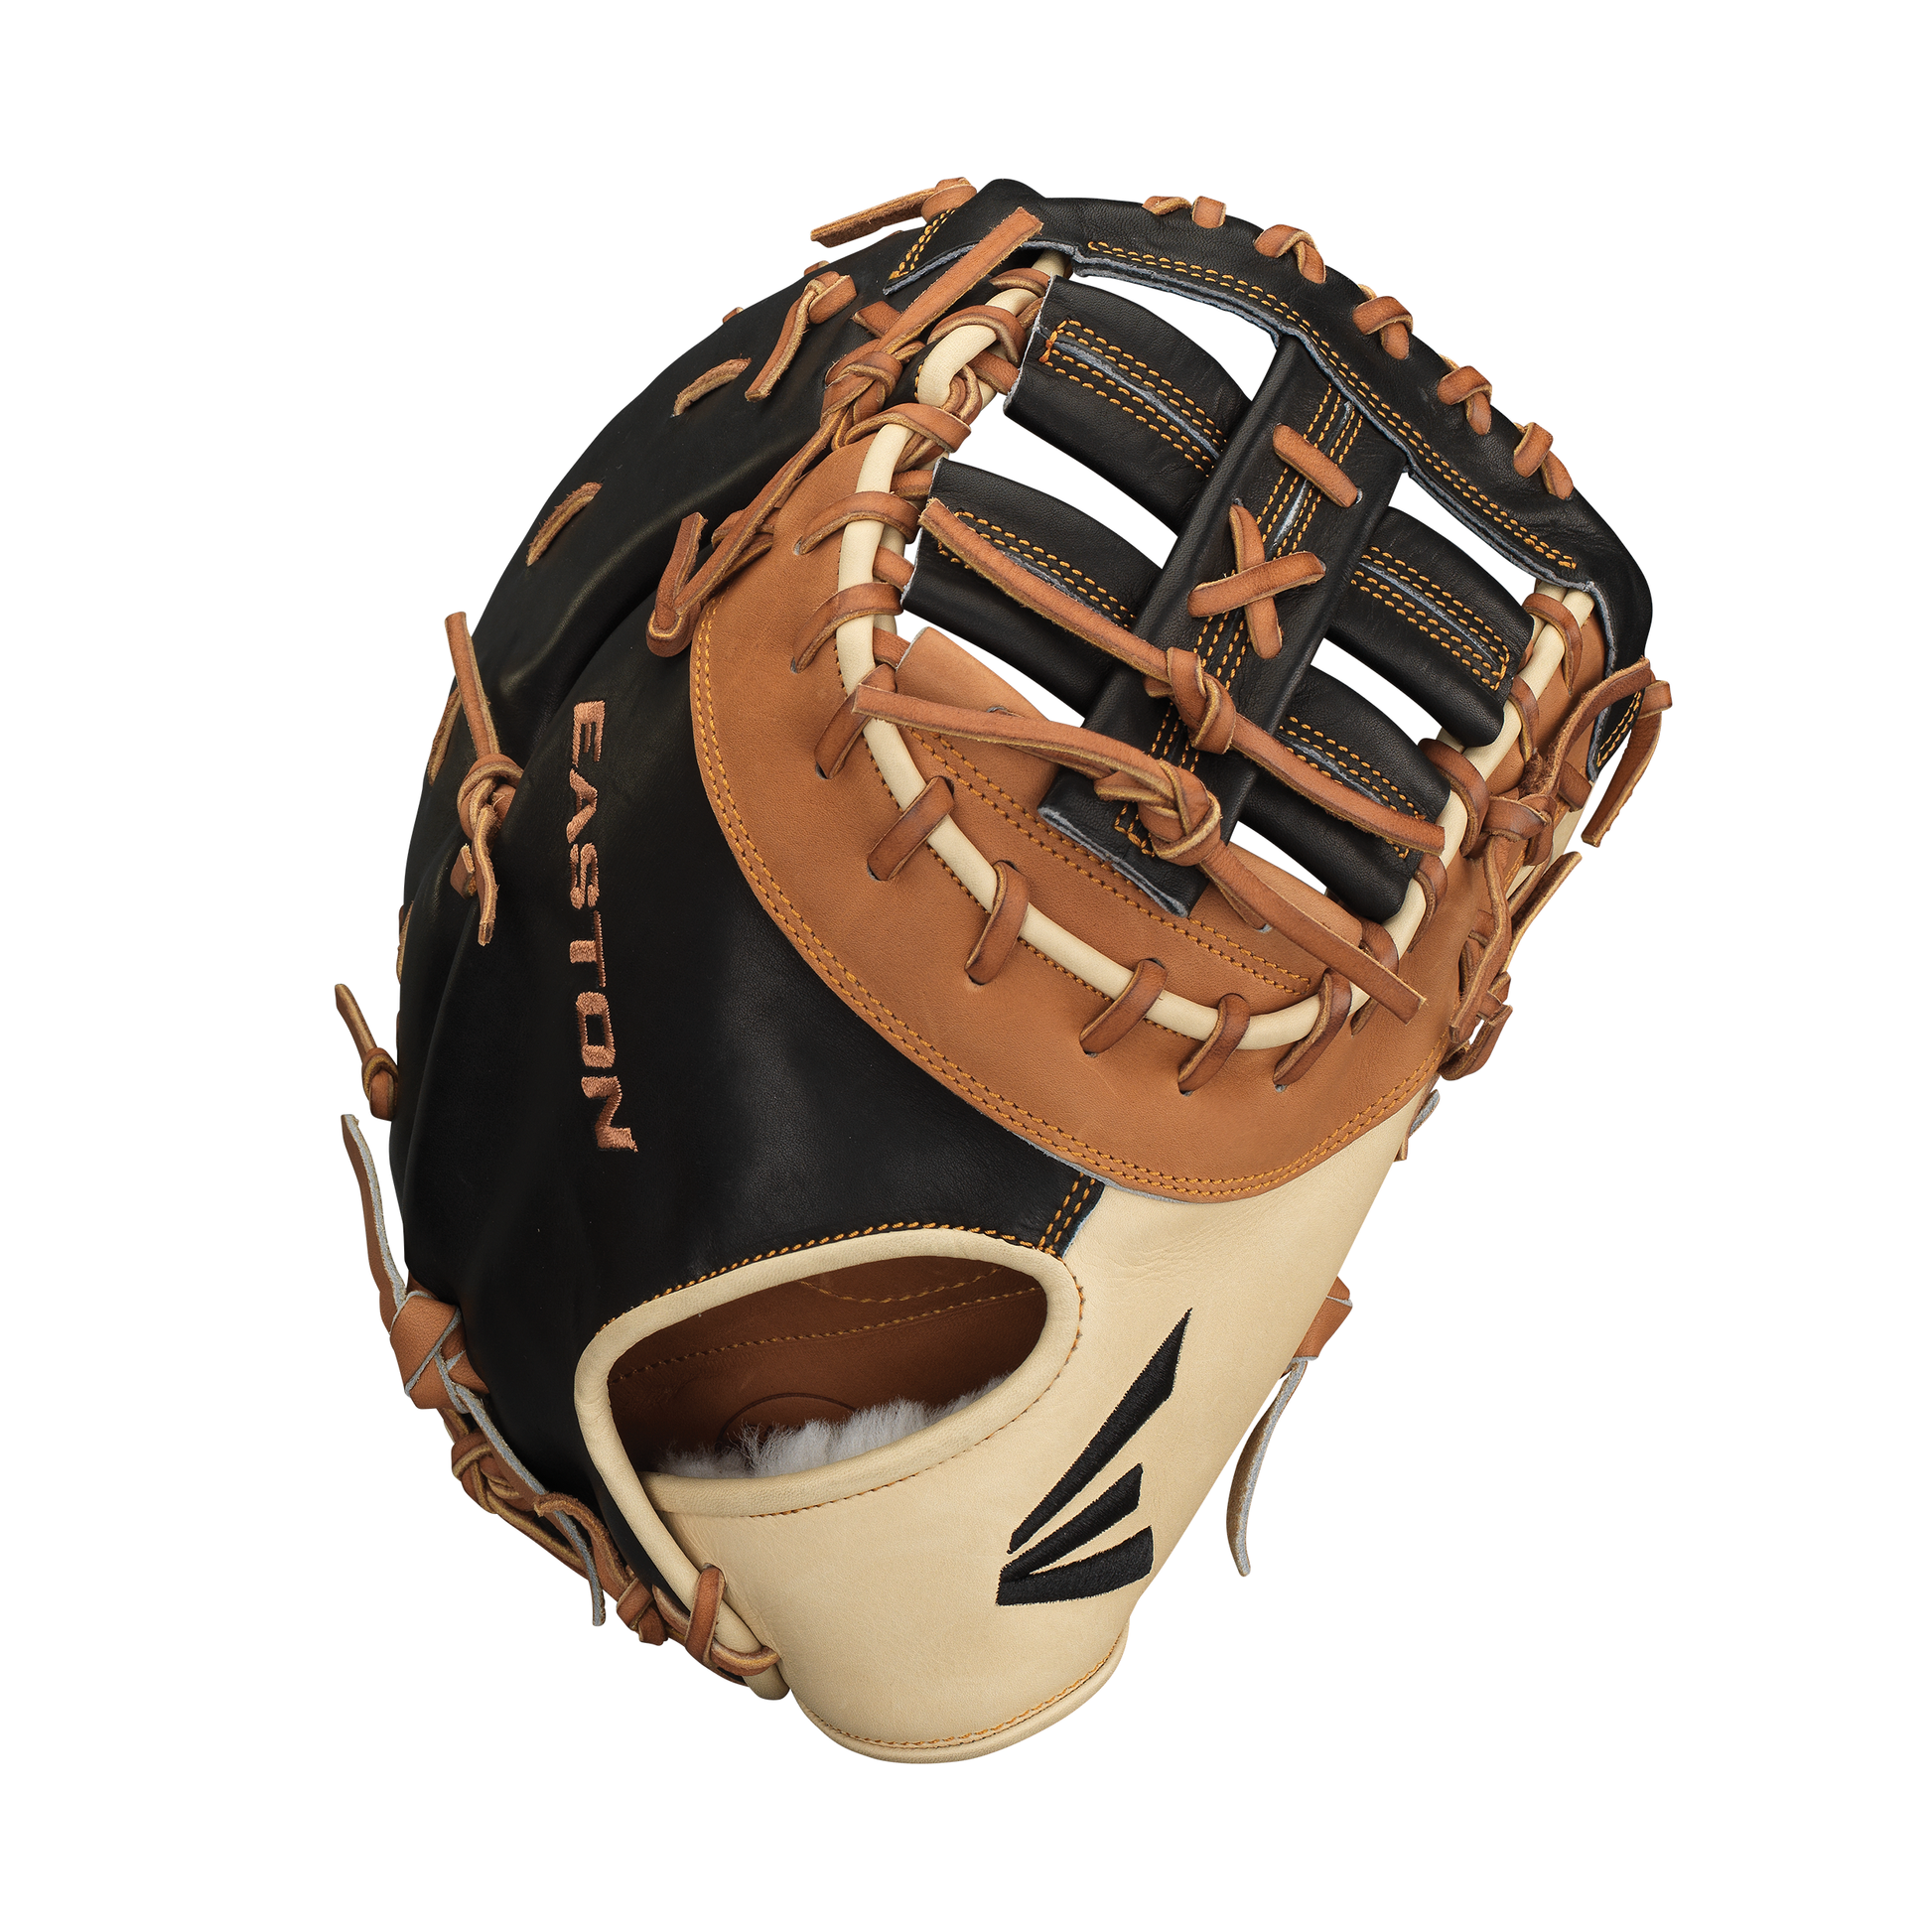 Easton Professional Collection Hybrid 12.75 inch First Base Glove PCH-K70